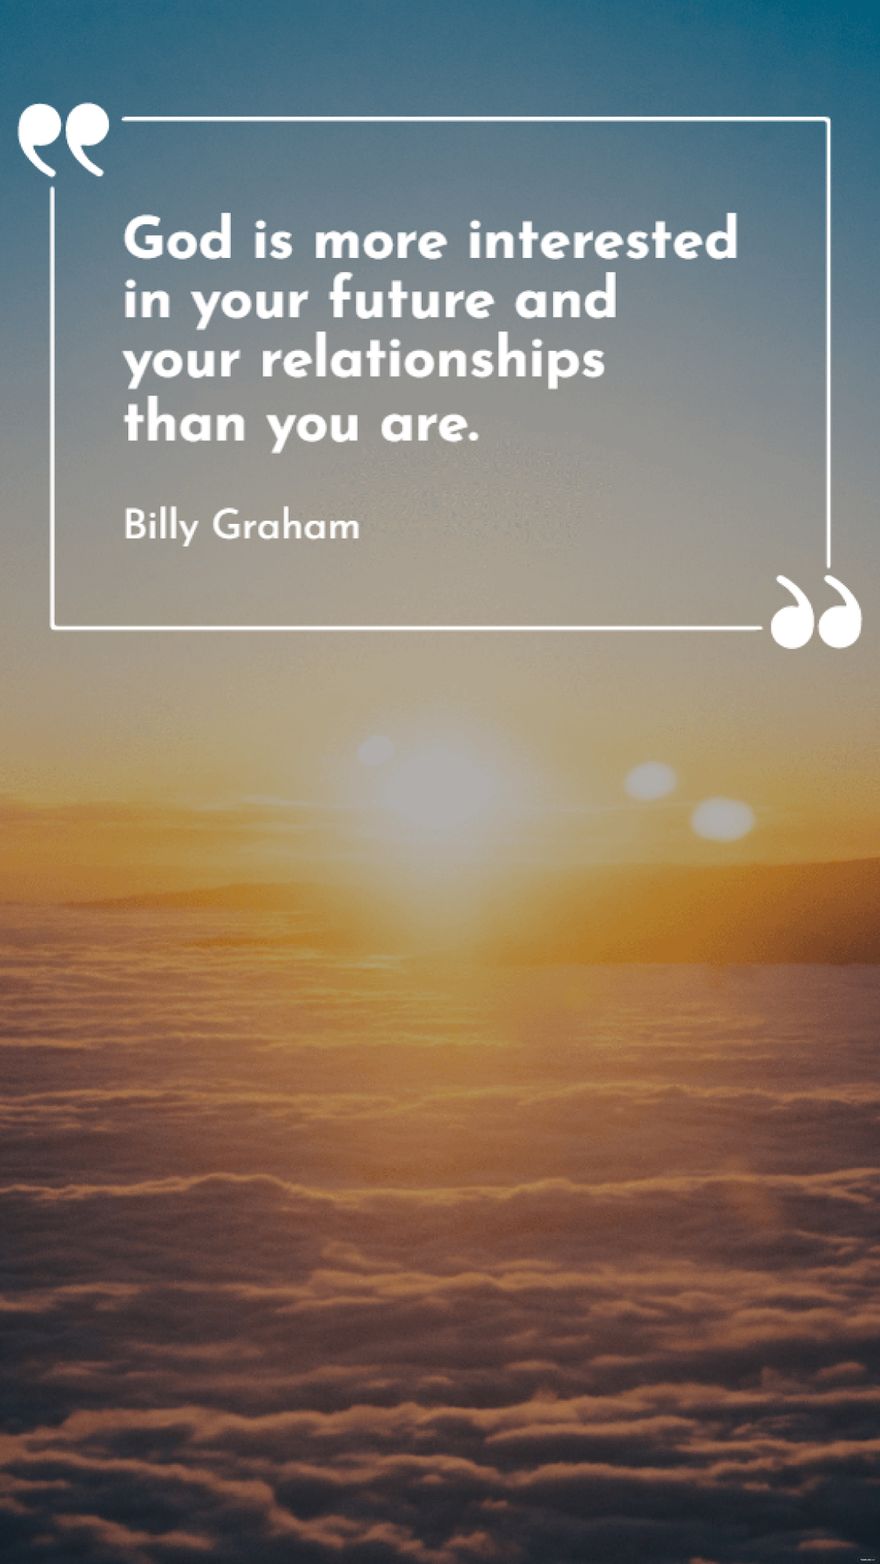 Billy Graham - God is more interested in your future and your relationships than you are.